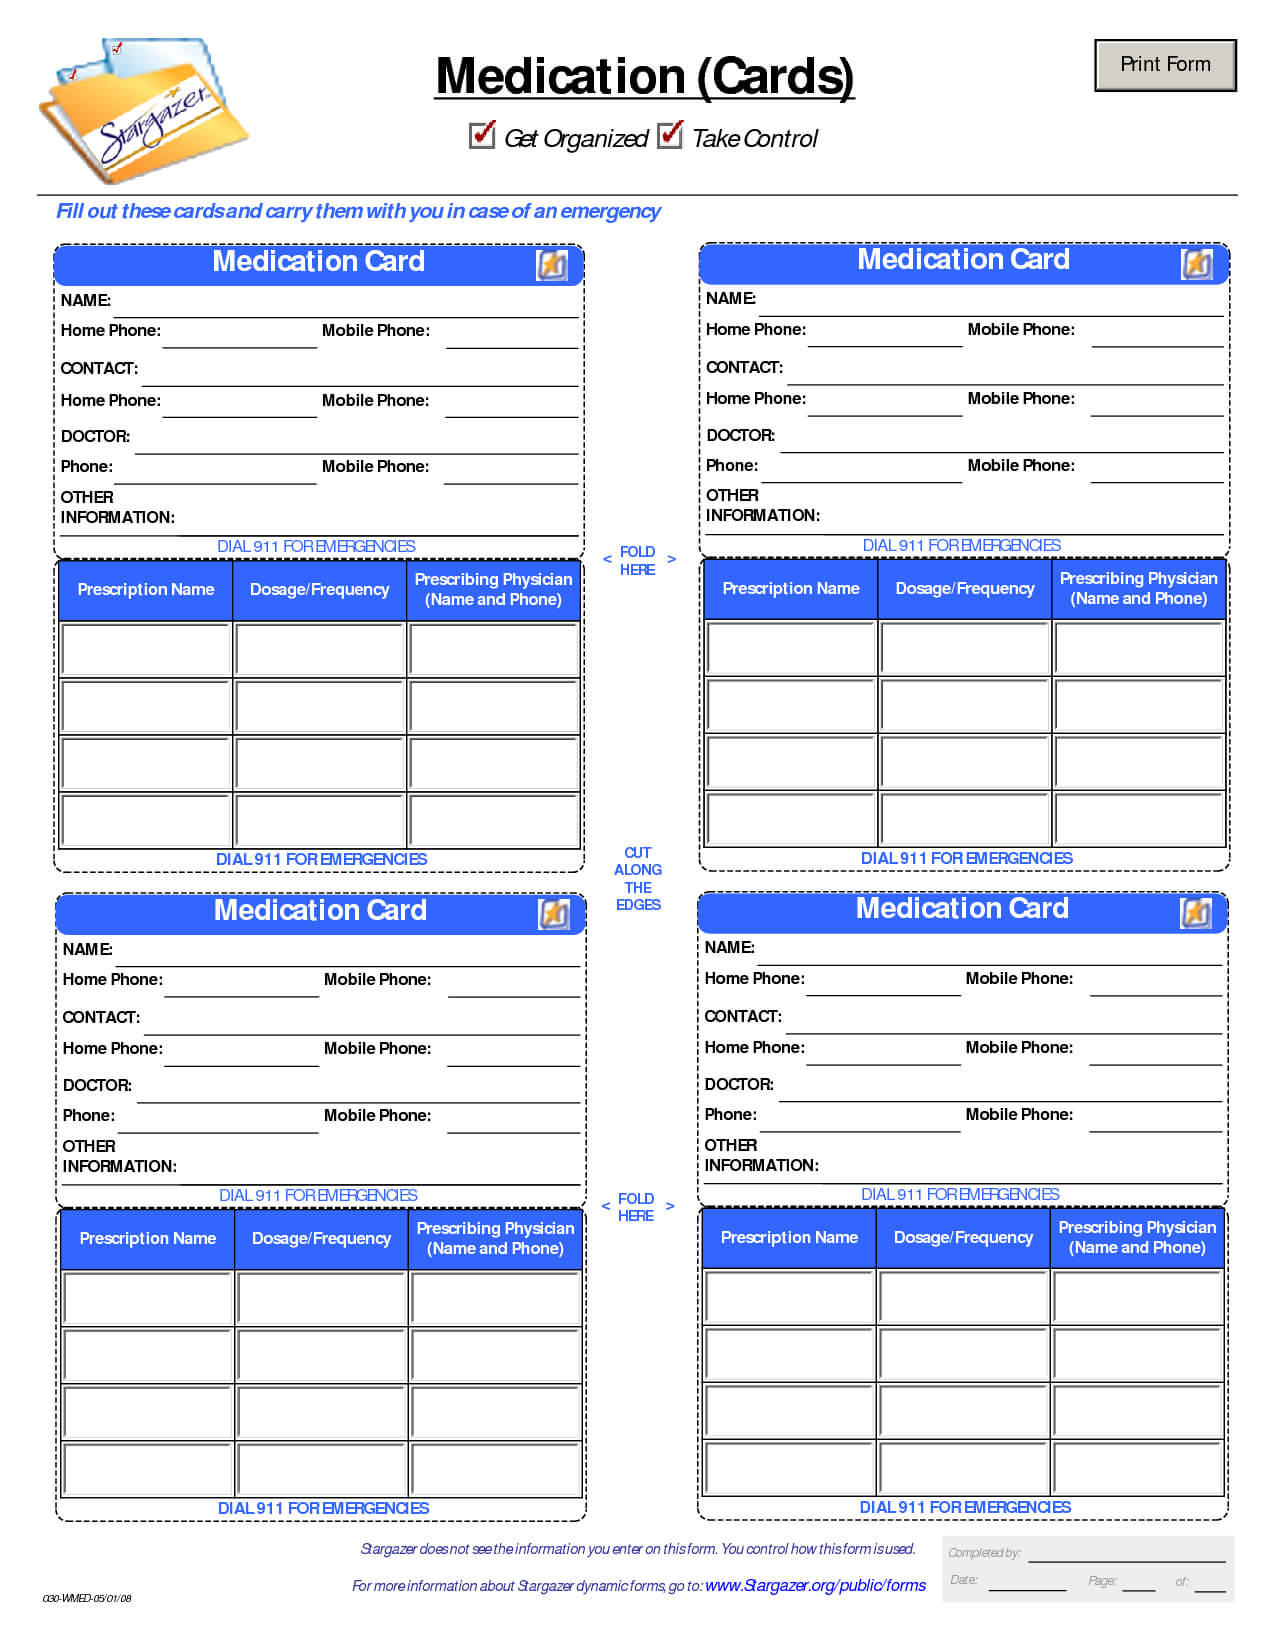 Patient Medication Card Template | Medication List, Medical Within Medical Alert Wallet Card Template